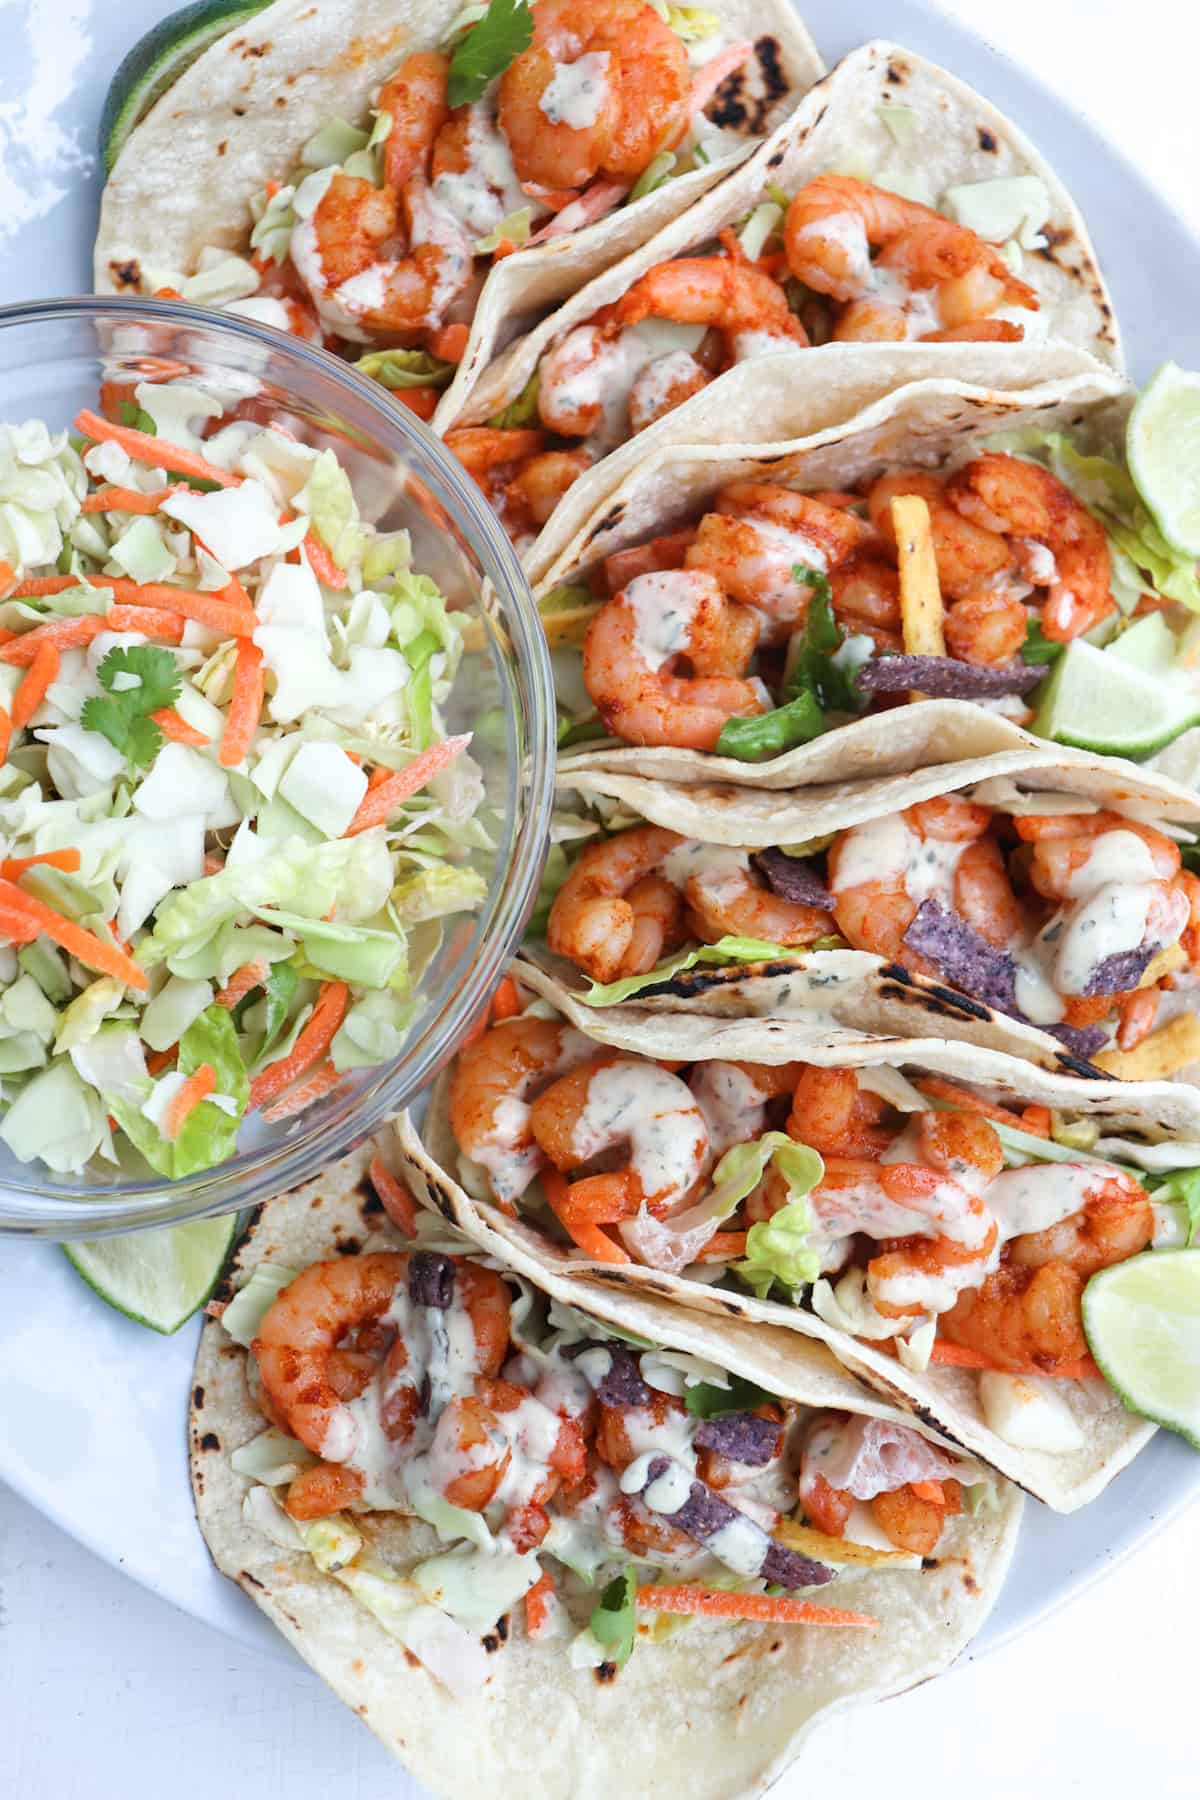 plate of shrimp tacos with cabbage to the side.